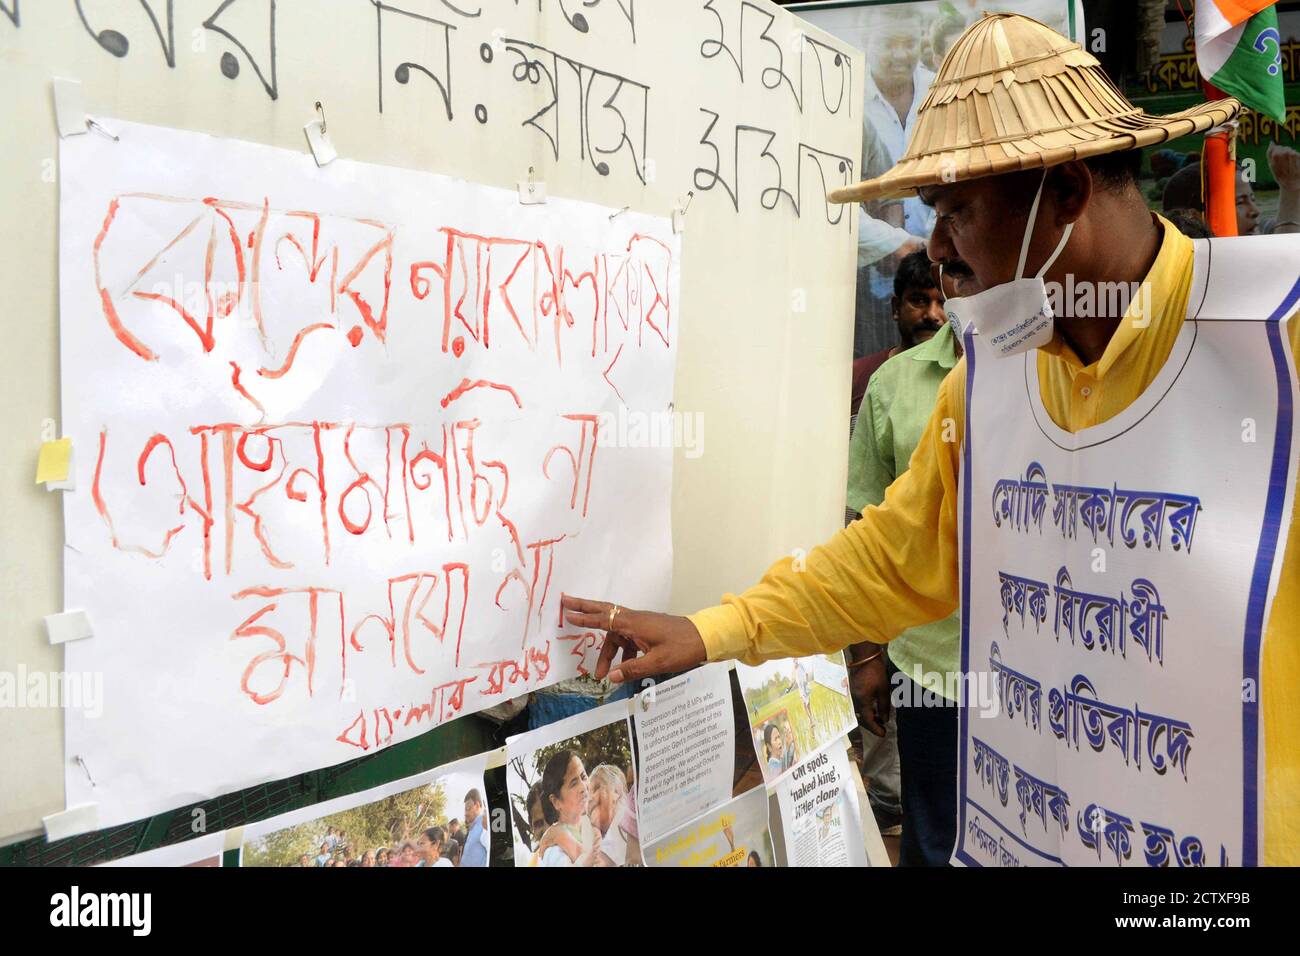 Kolkata, India. 25th Sep, 2020. TMC MLA from Singur Becharam Manna writes slogan using blood from finger during West Bengal Kishan Majdoor Trinamool Congress Committee protest against Farm Bill near Gandhi statue. (Photo by Ved Prakash/Pacific Press) Credit: Pacific Press Media Production Corp./Alamy Live News Stock Photo